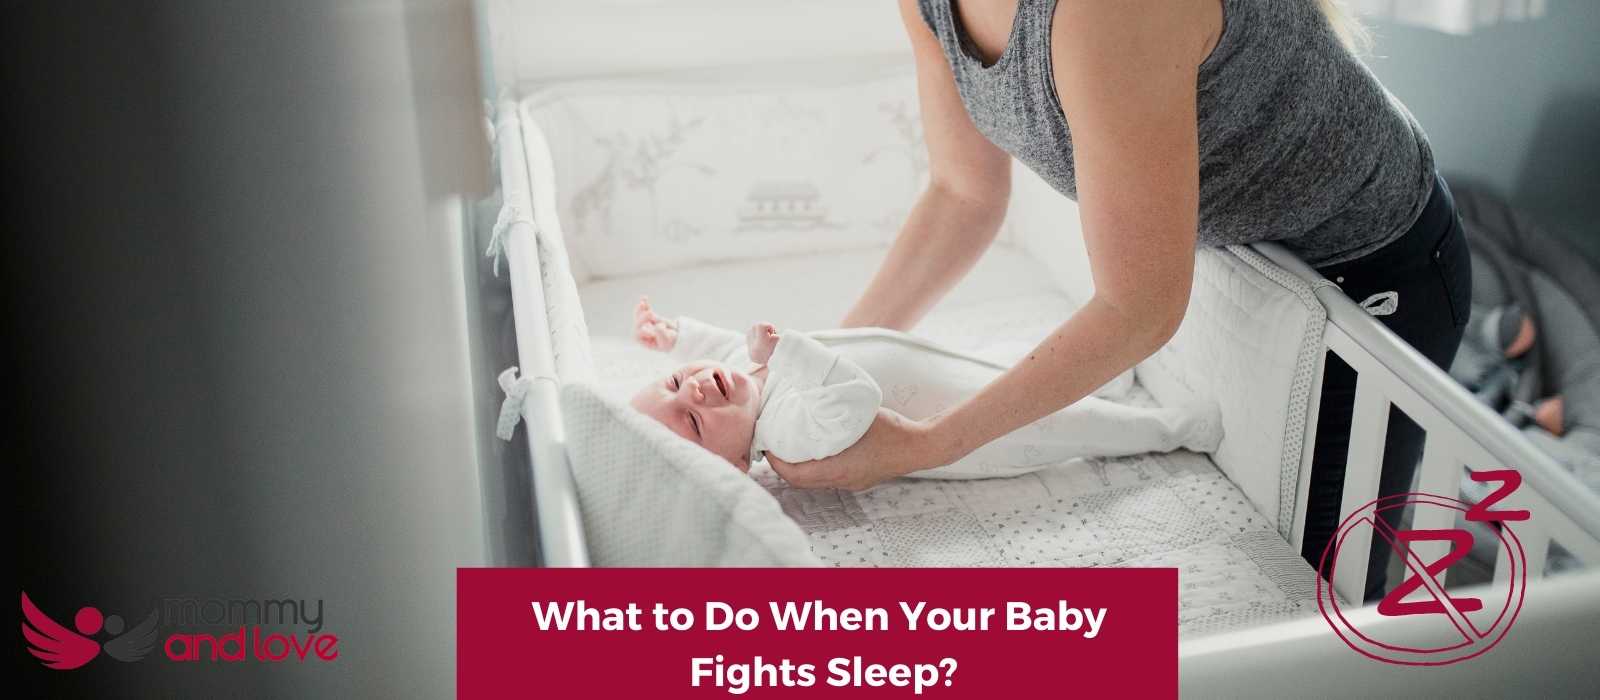 What to Do When Your Baby Fights Sleep